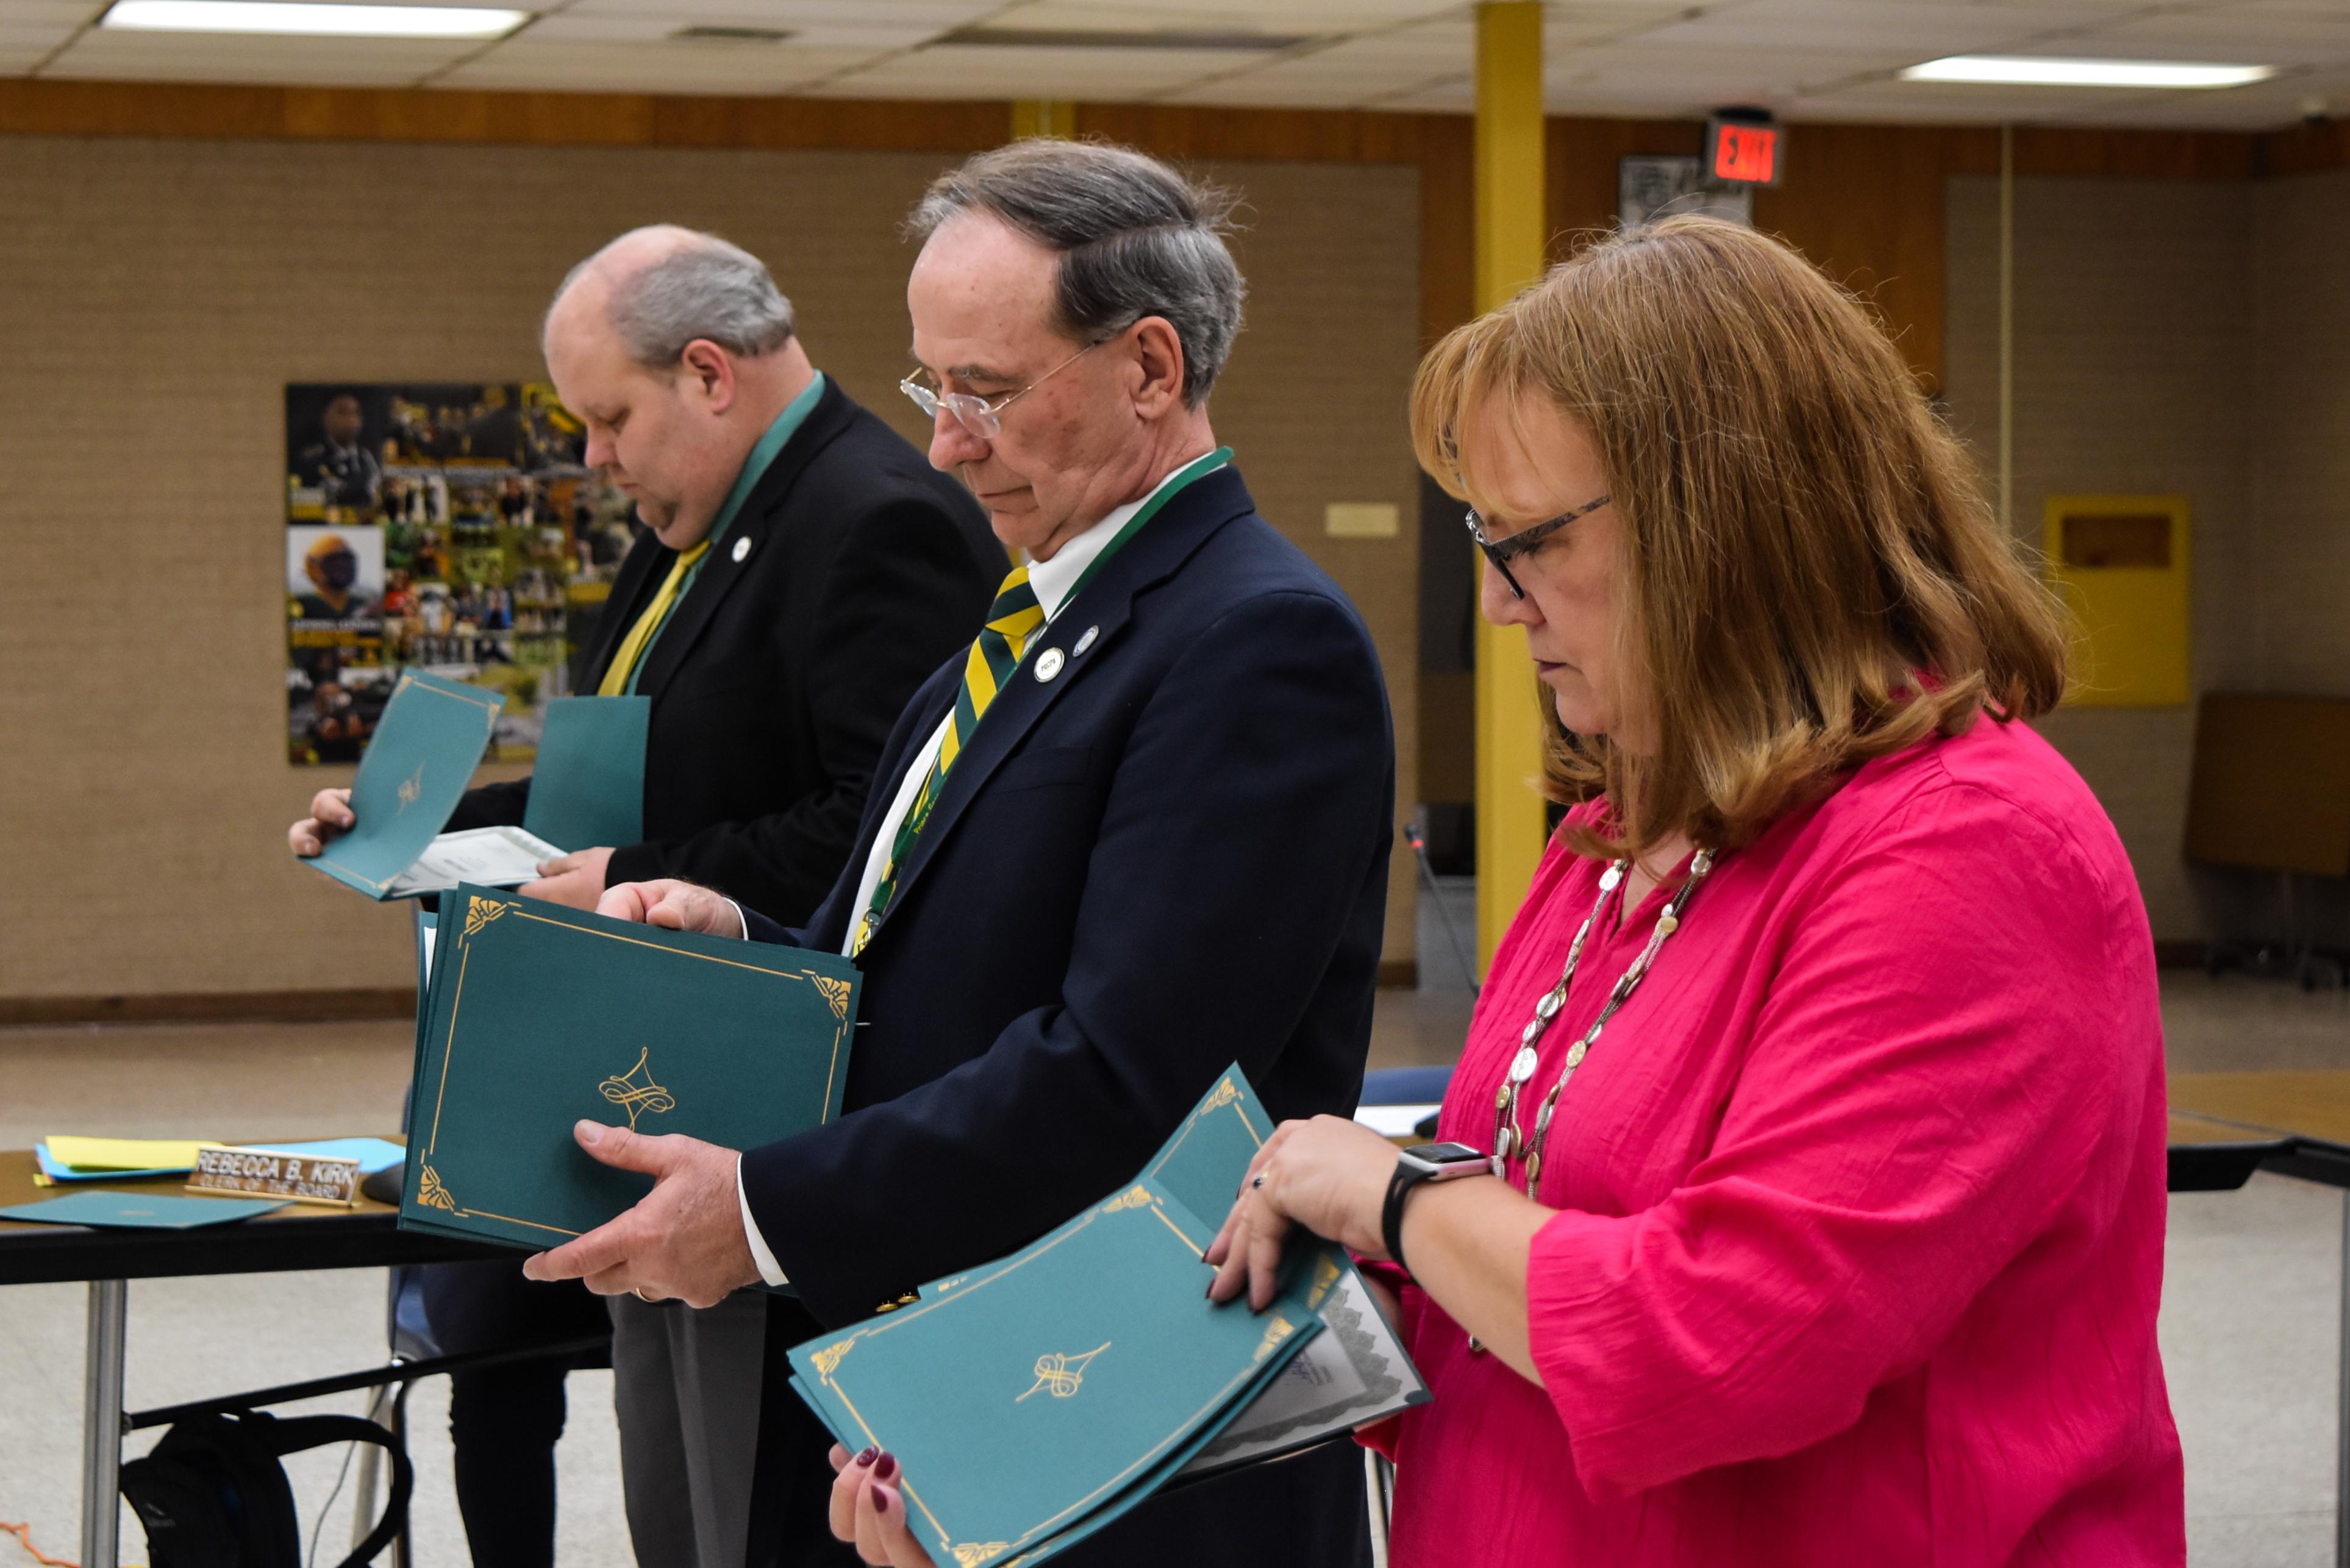 Scenes from the March 2022 School Board Recognitions Program